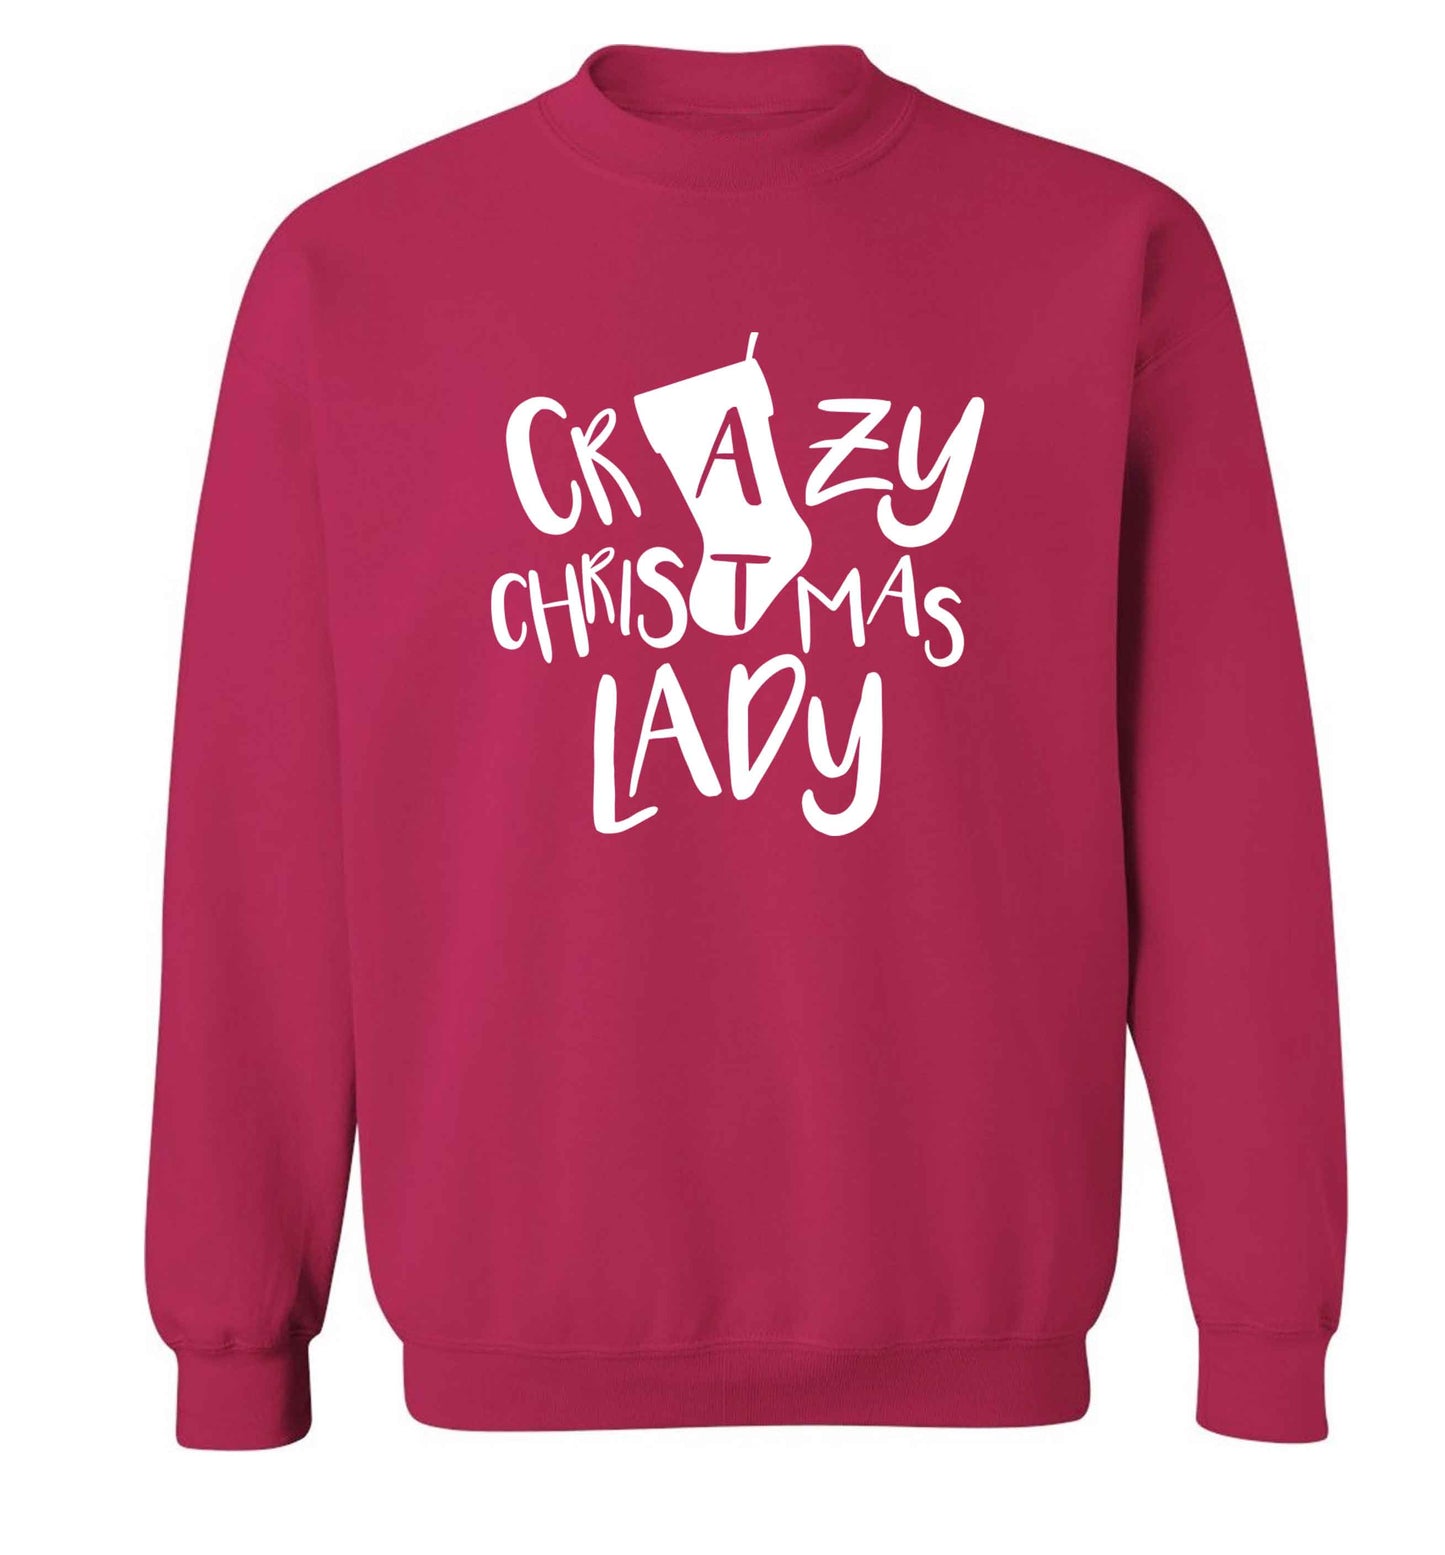 Crazy Christmas Dude adult's unisex pink sweater 2XL